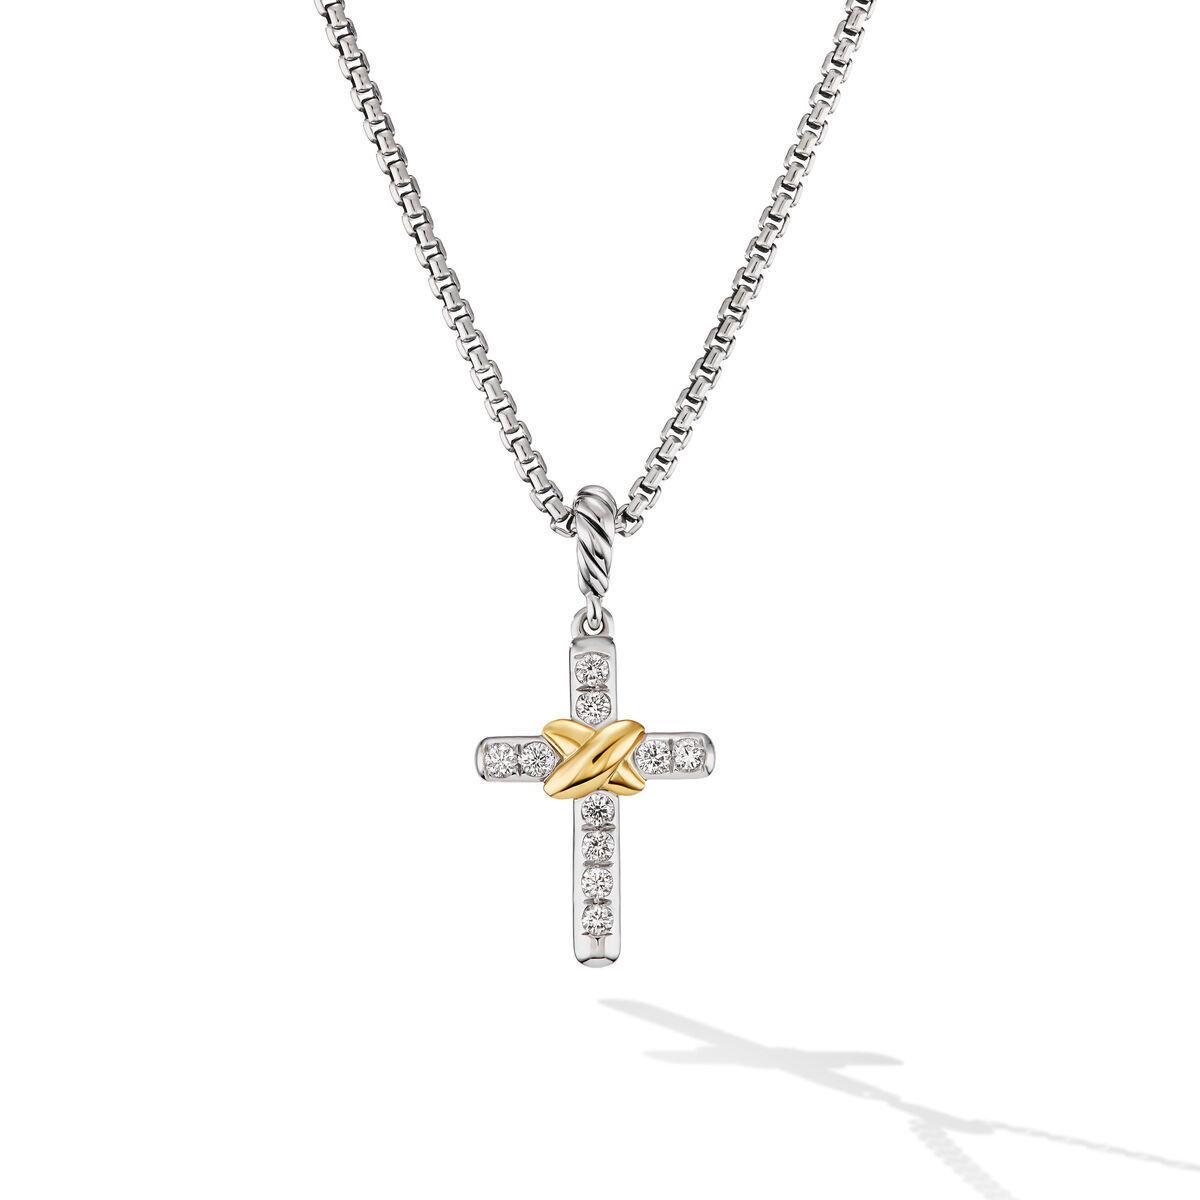 David Yurman Petite Cross Necklace in Sterling Silver and 18K Yellow Gold with Diamonds 0